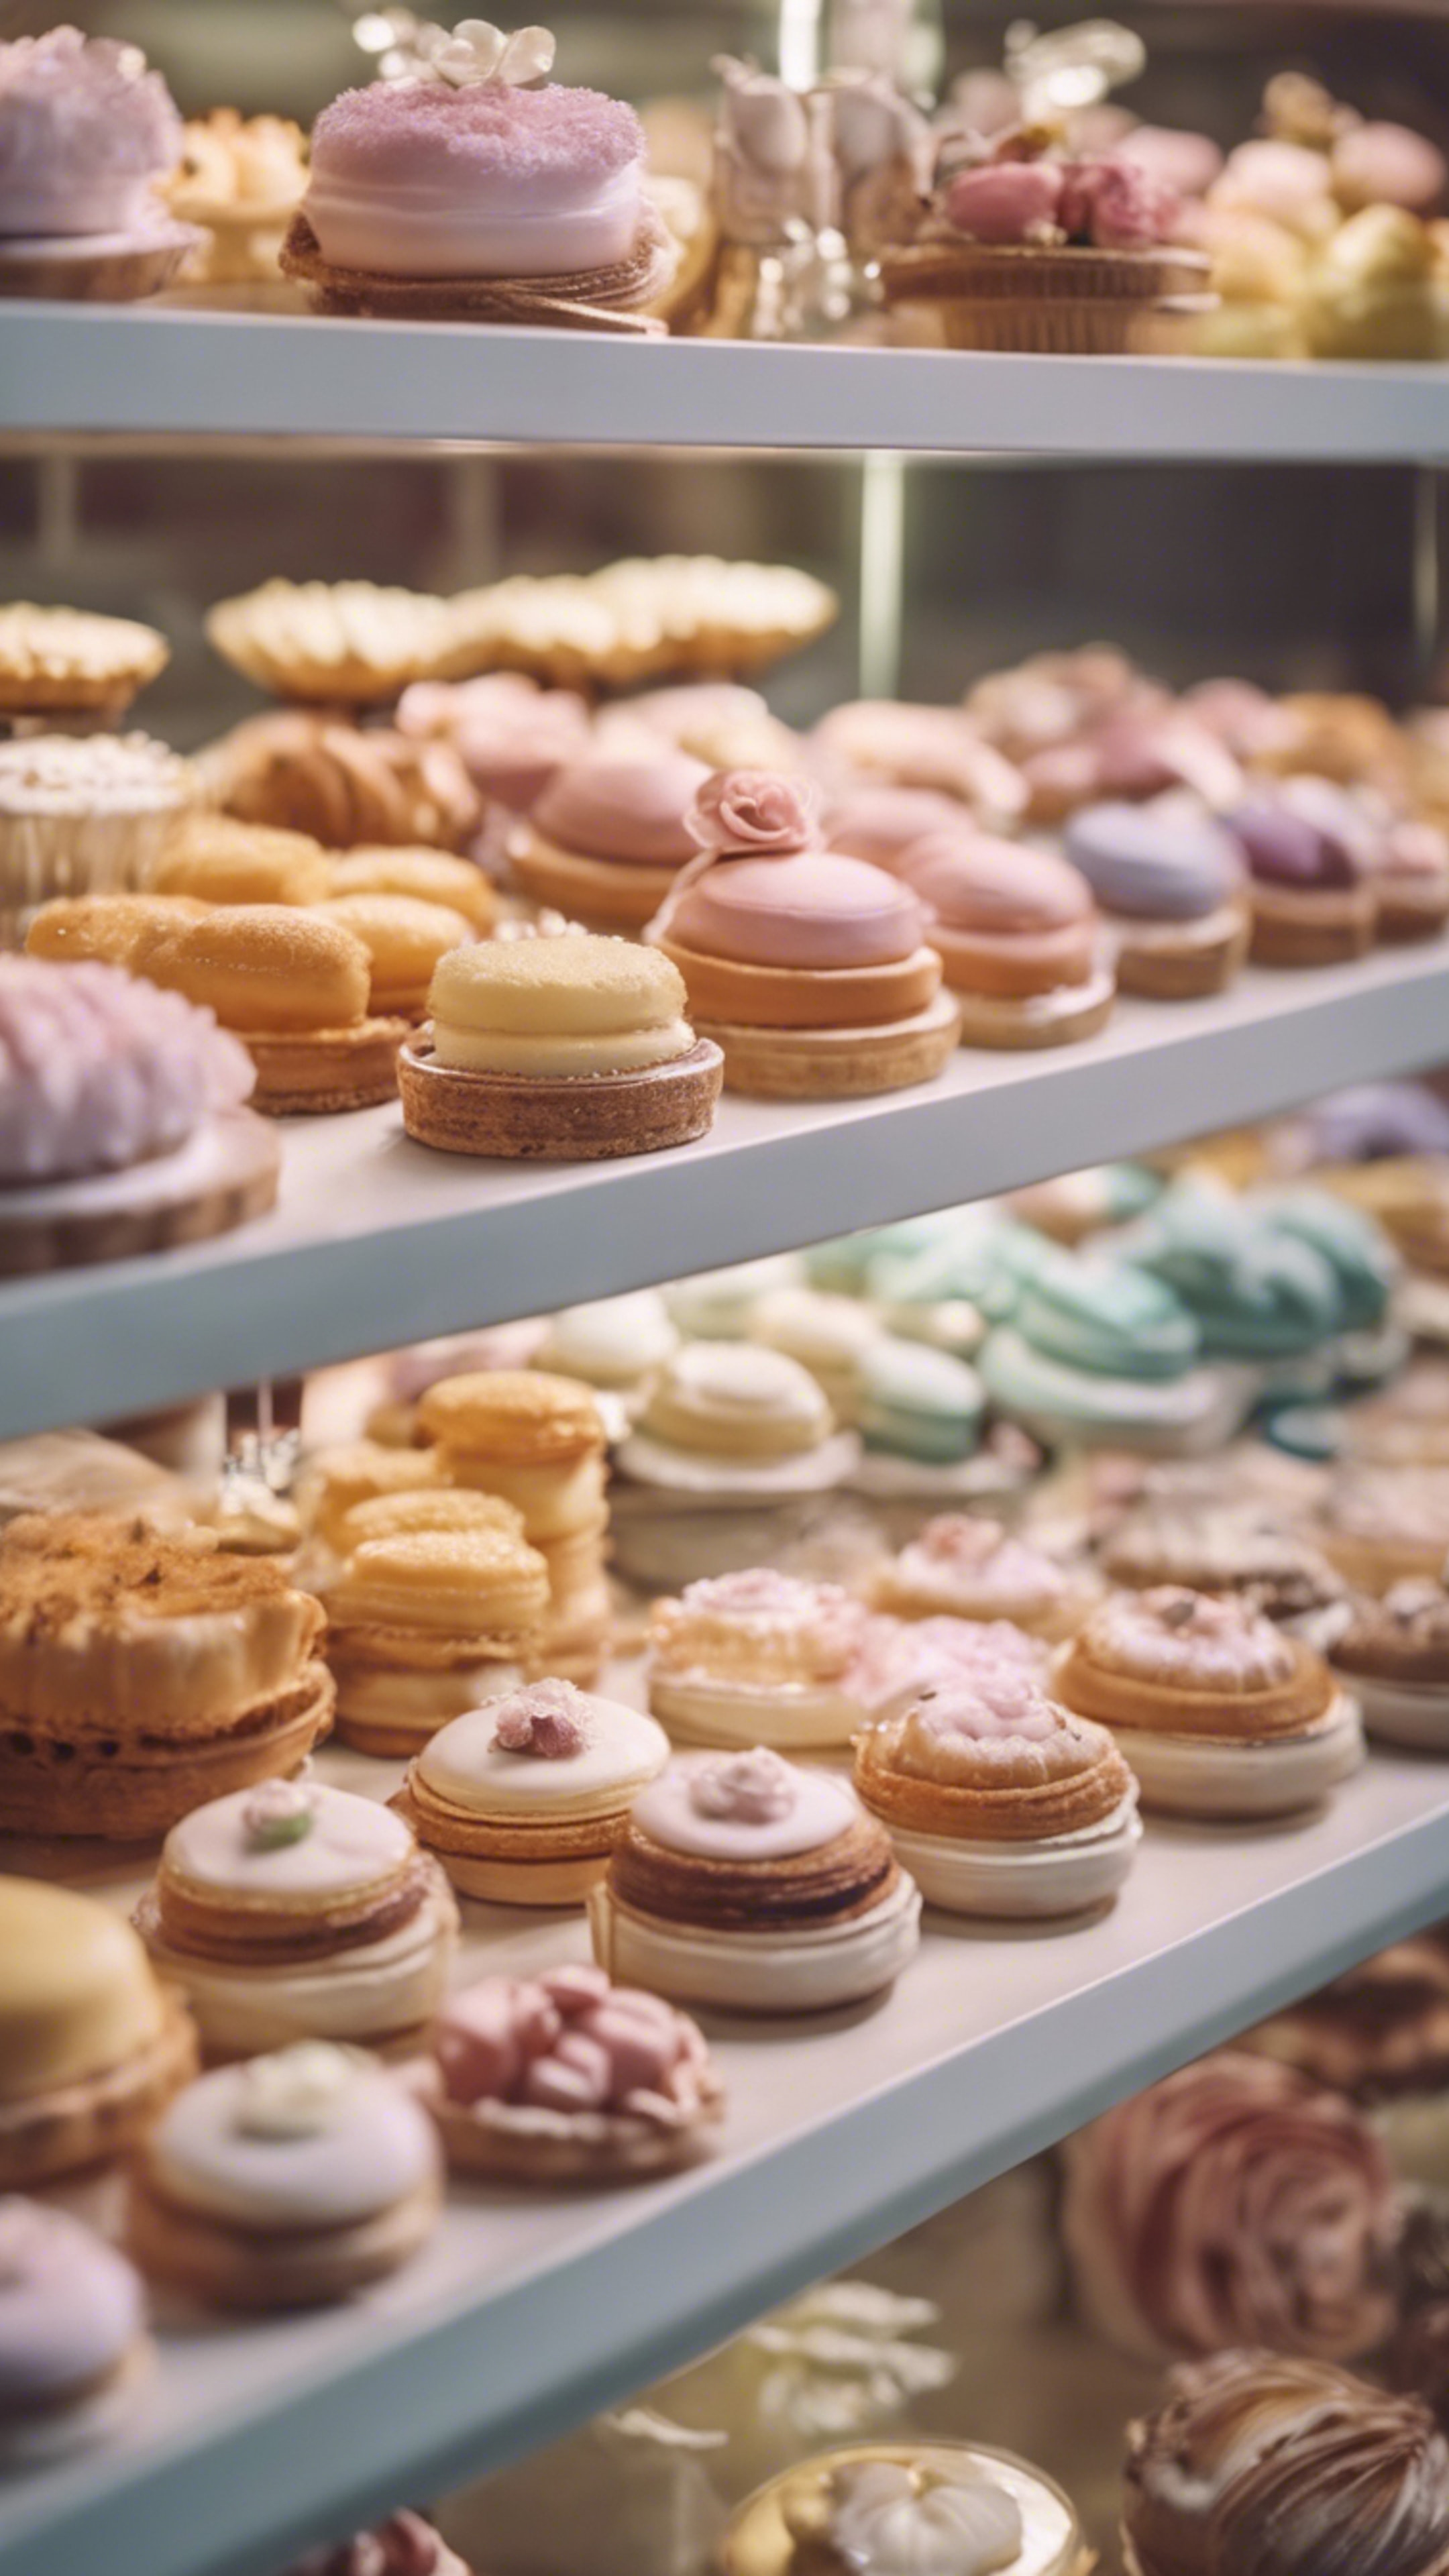 A classic French patisserie in pastel colors, filled with elegantly fashioned cakes and pastries. Tapet[85bb484f9d7f40c5ac29]